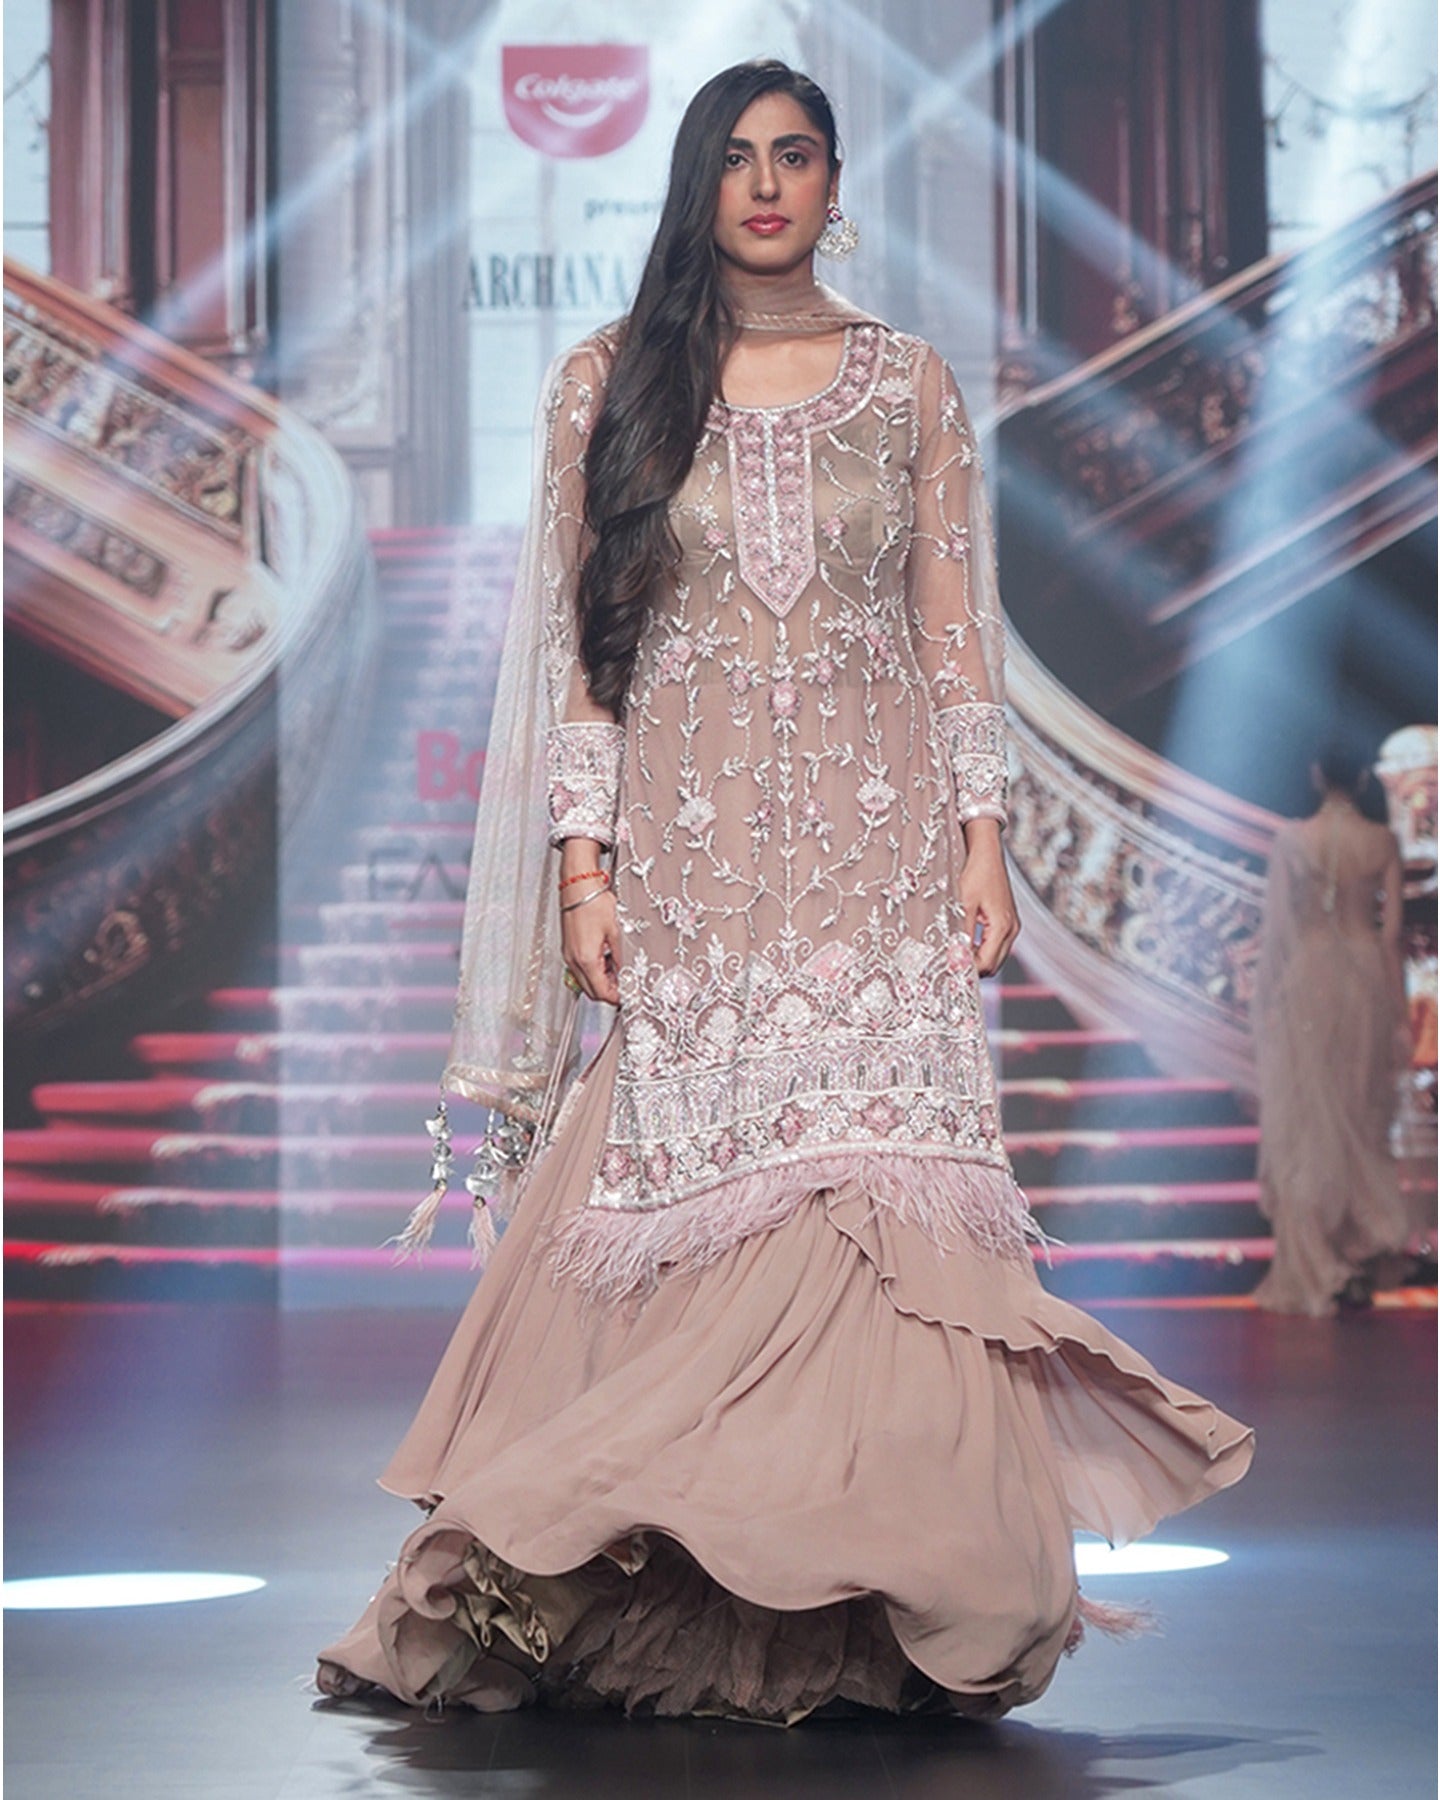 Draped in the rich ecru hue, this anarkali unfolds a story of elegance and intricate floral beauty.